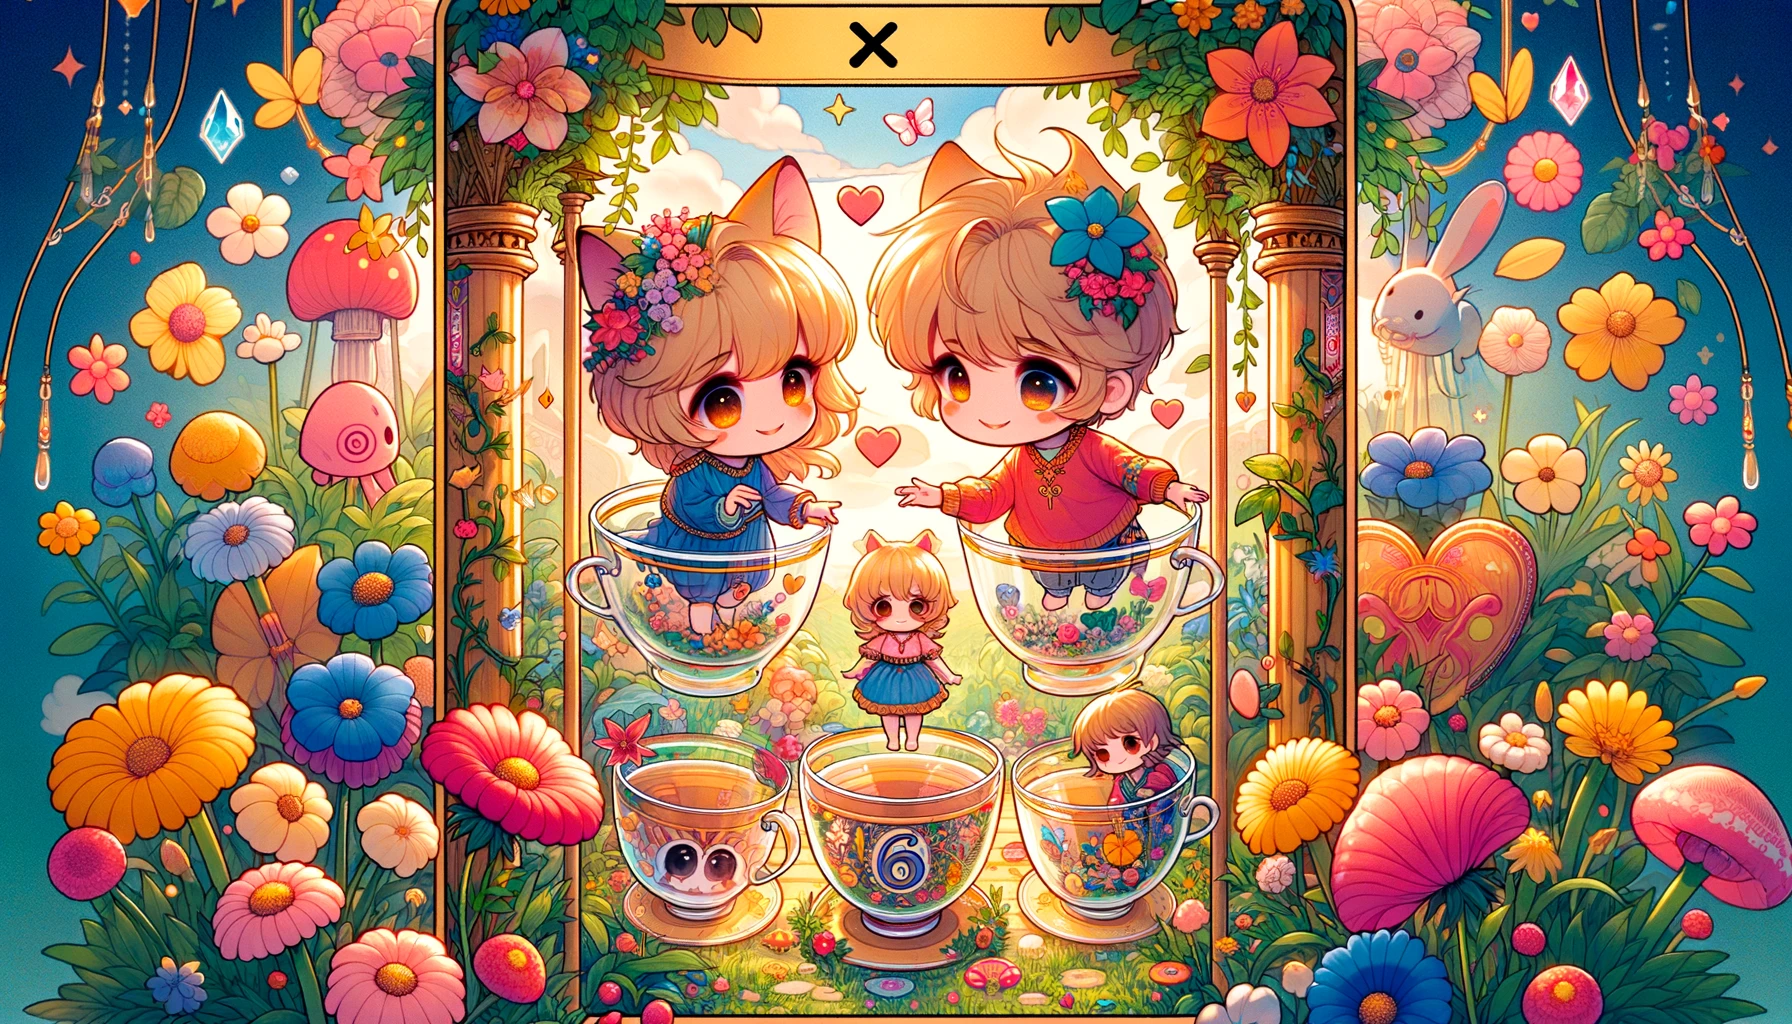 A chibi style illustration of the Six of Cups tarot card capturing the themes of childhood nostalgia and emotional connection. The image features ado